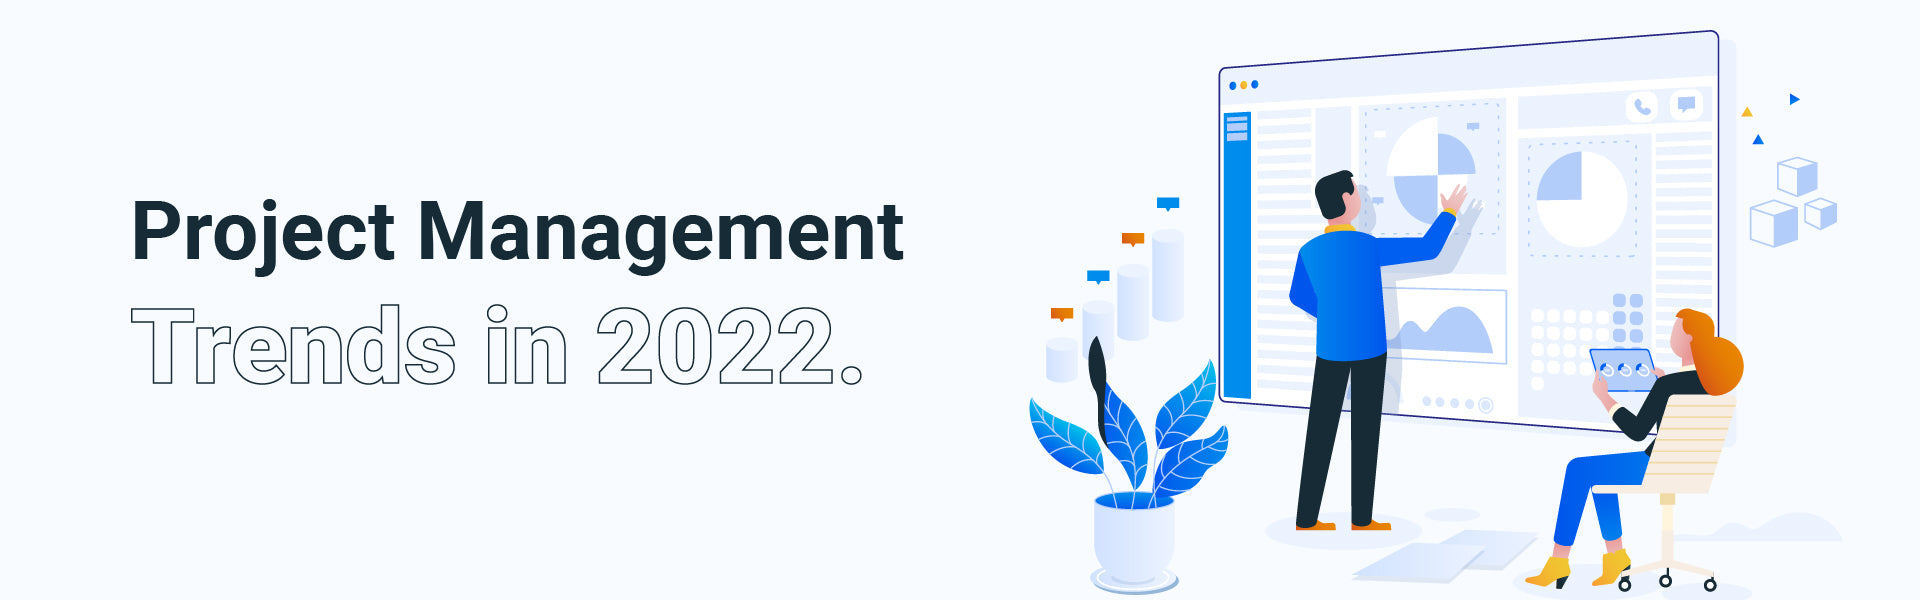 Project Management Trends in 2023